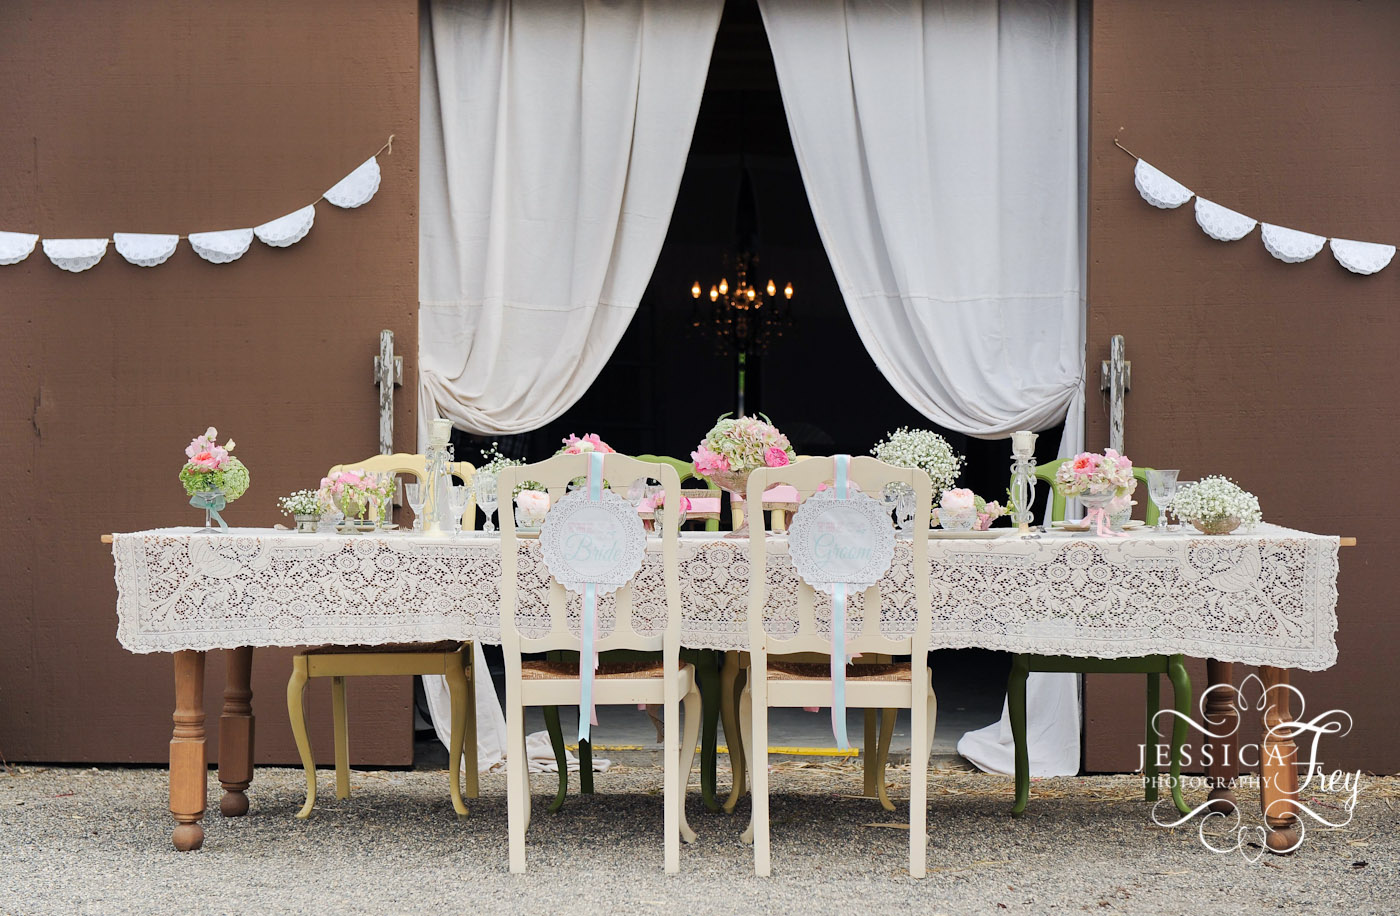 Jessica Frey Photography, mink and pink wedding